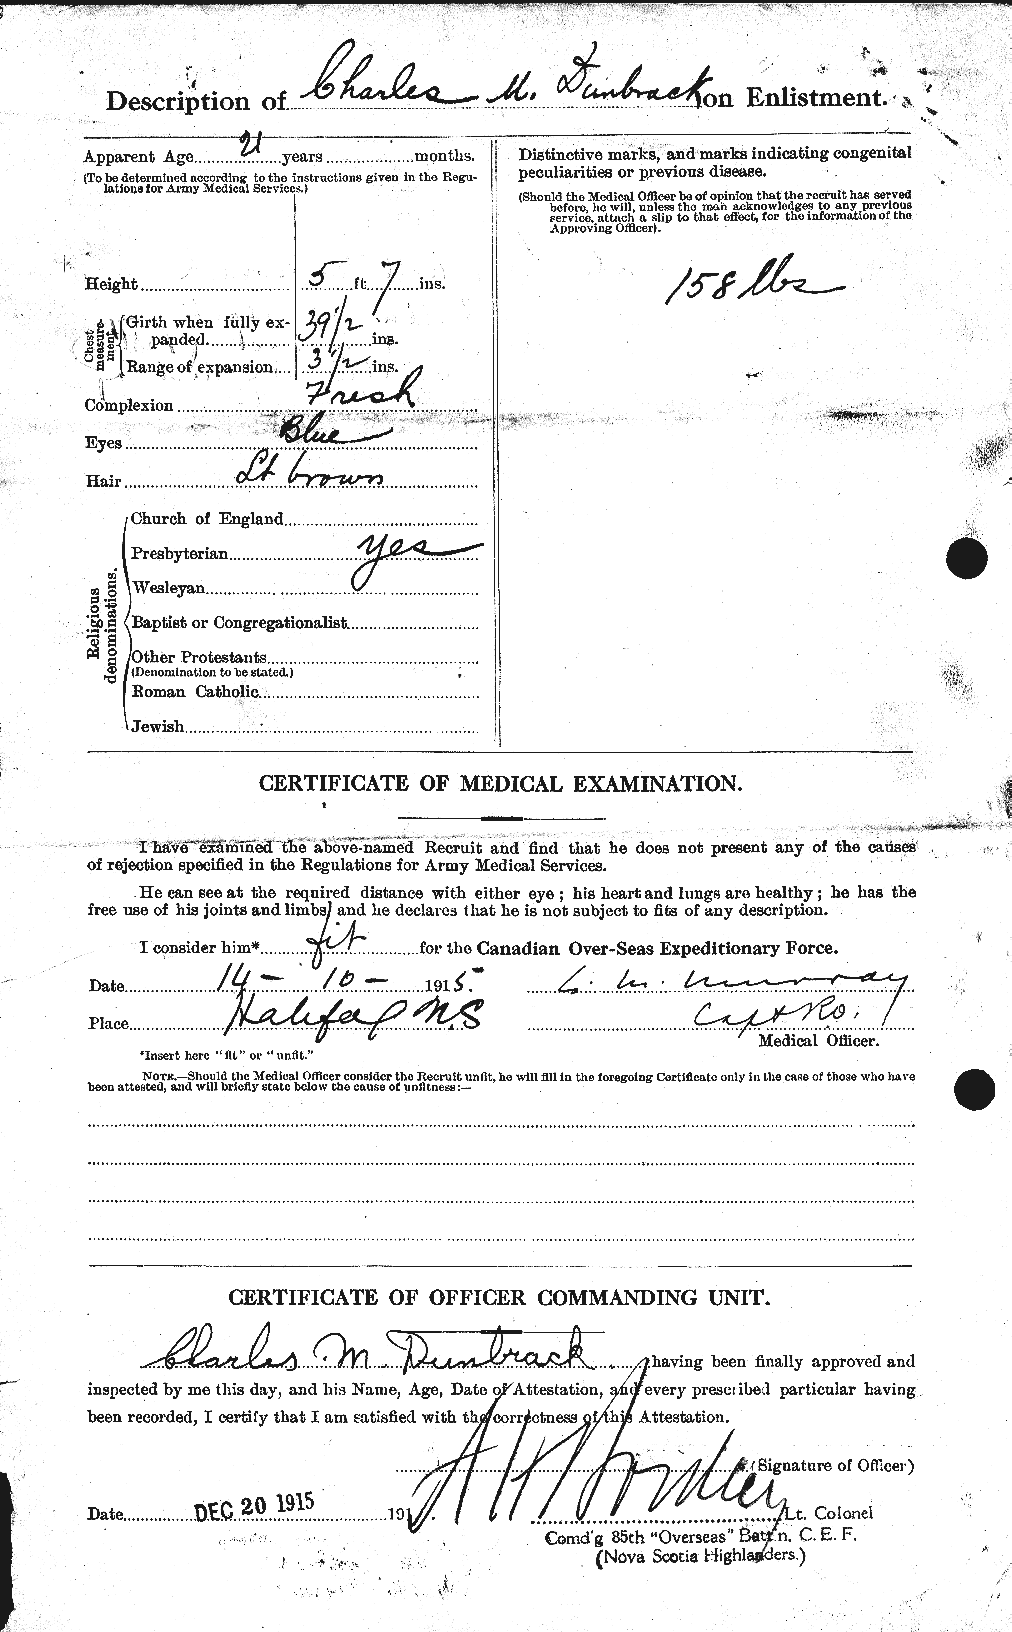 Personnel Records of the First World War - CEF 301587b